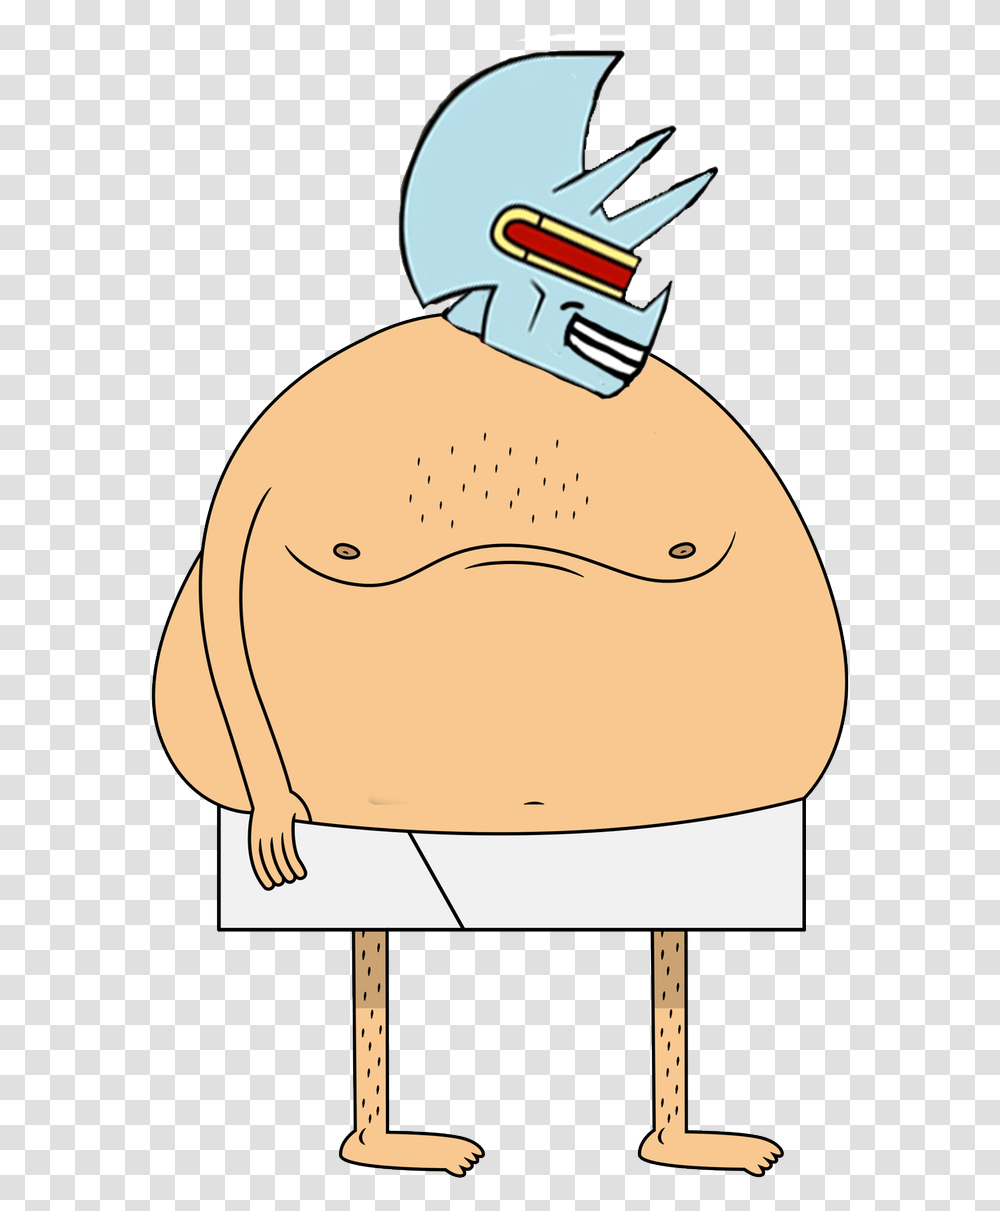 Lord Bung Blm Fictional Character, Produce, Food, Shoulder, Sack Transparent Png